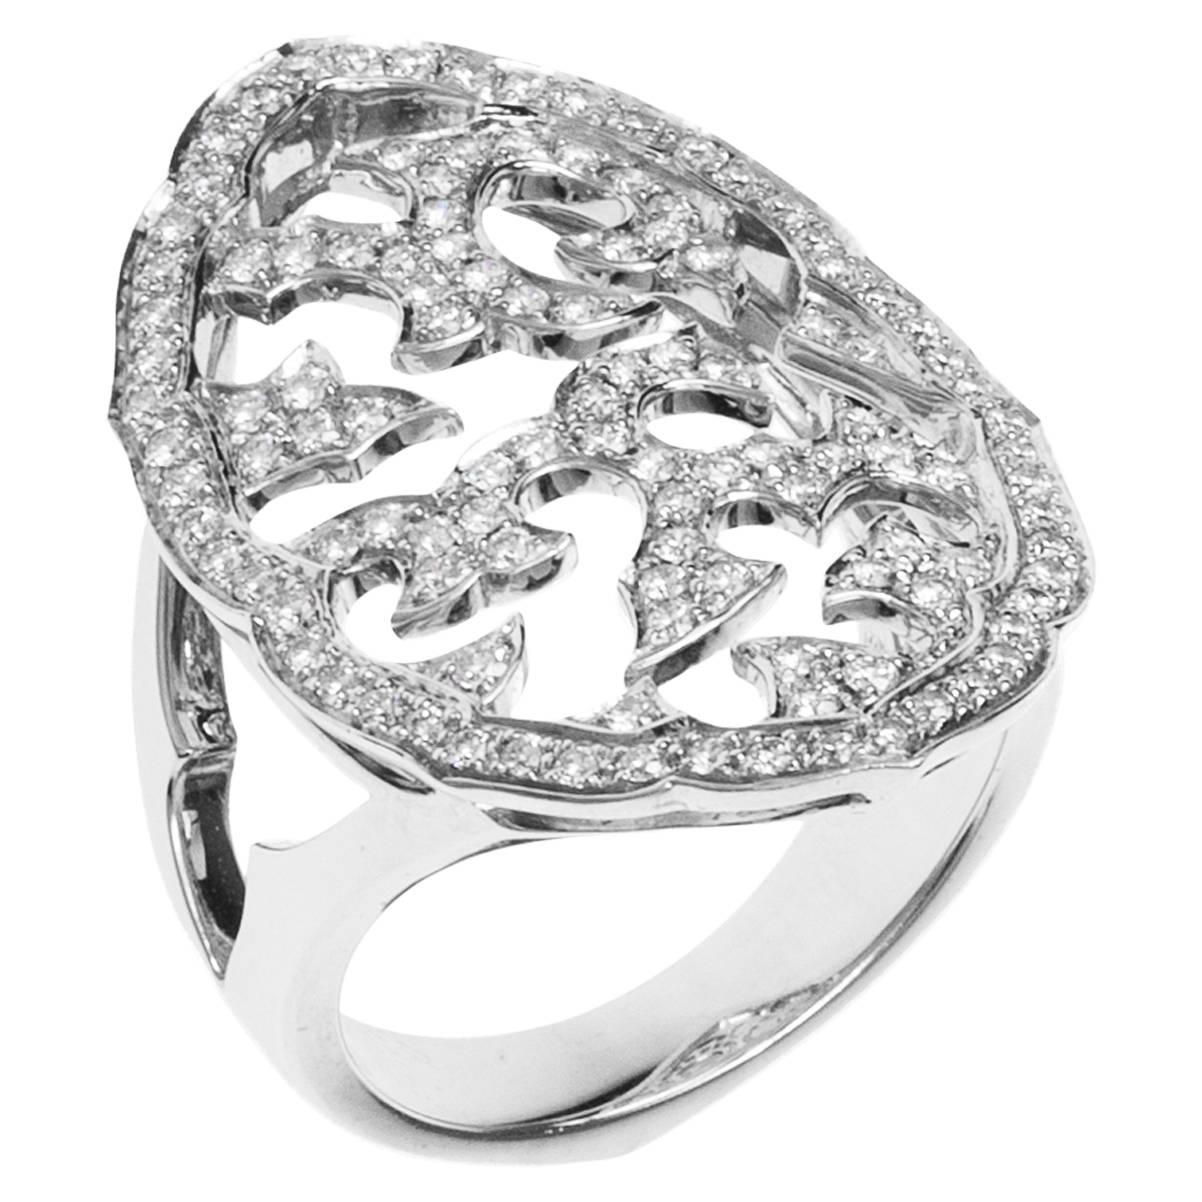 Stephen Webster Diamond Gold “Borneo” Ring For Sale